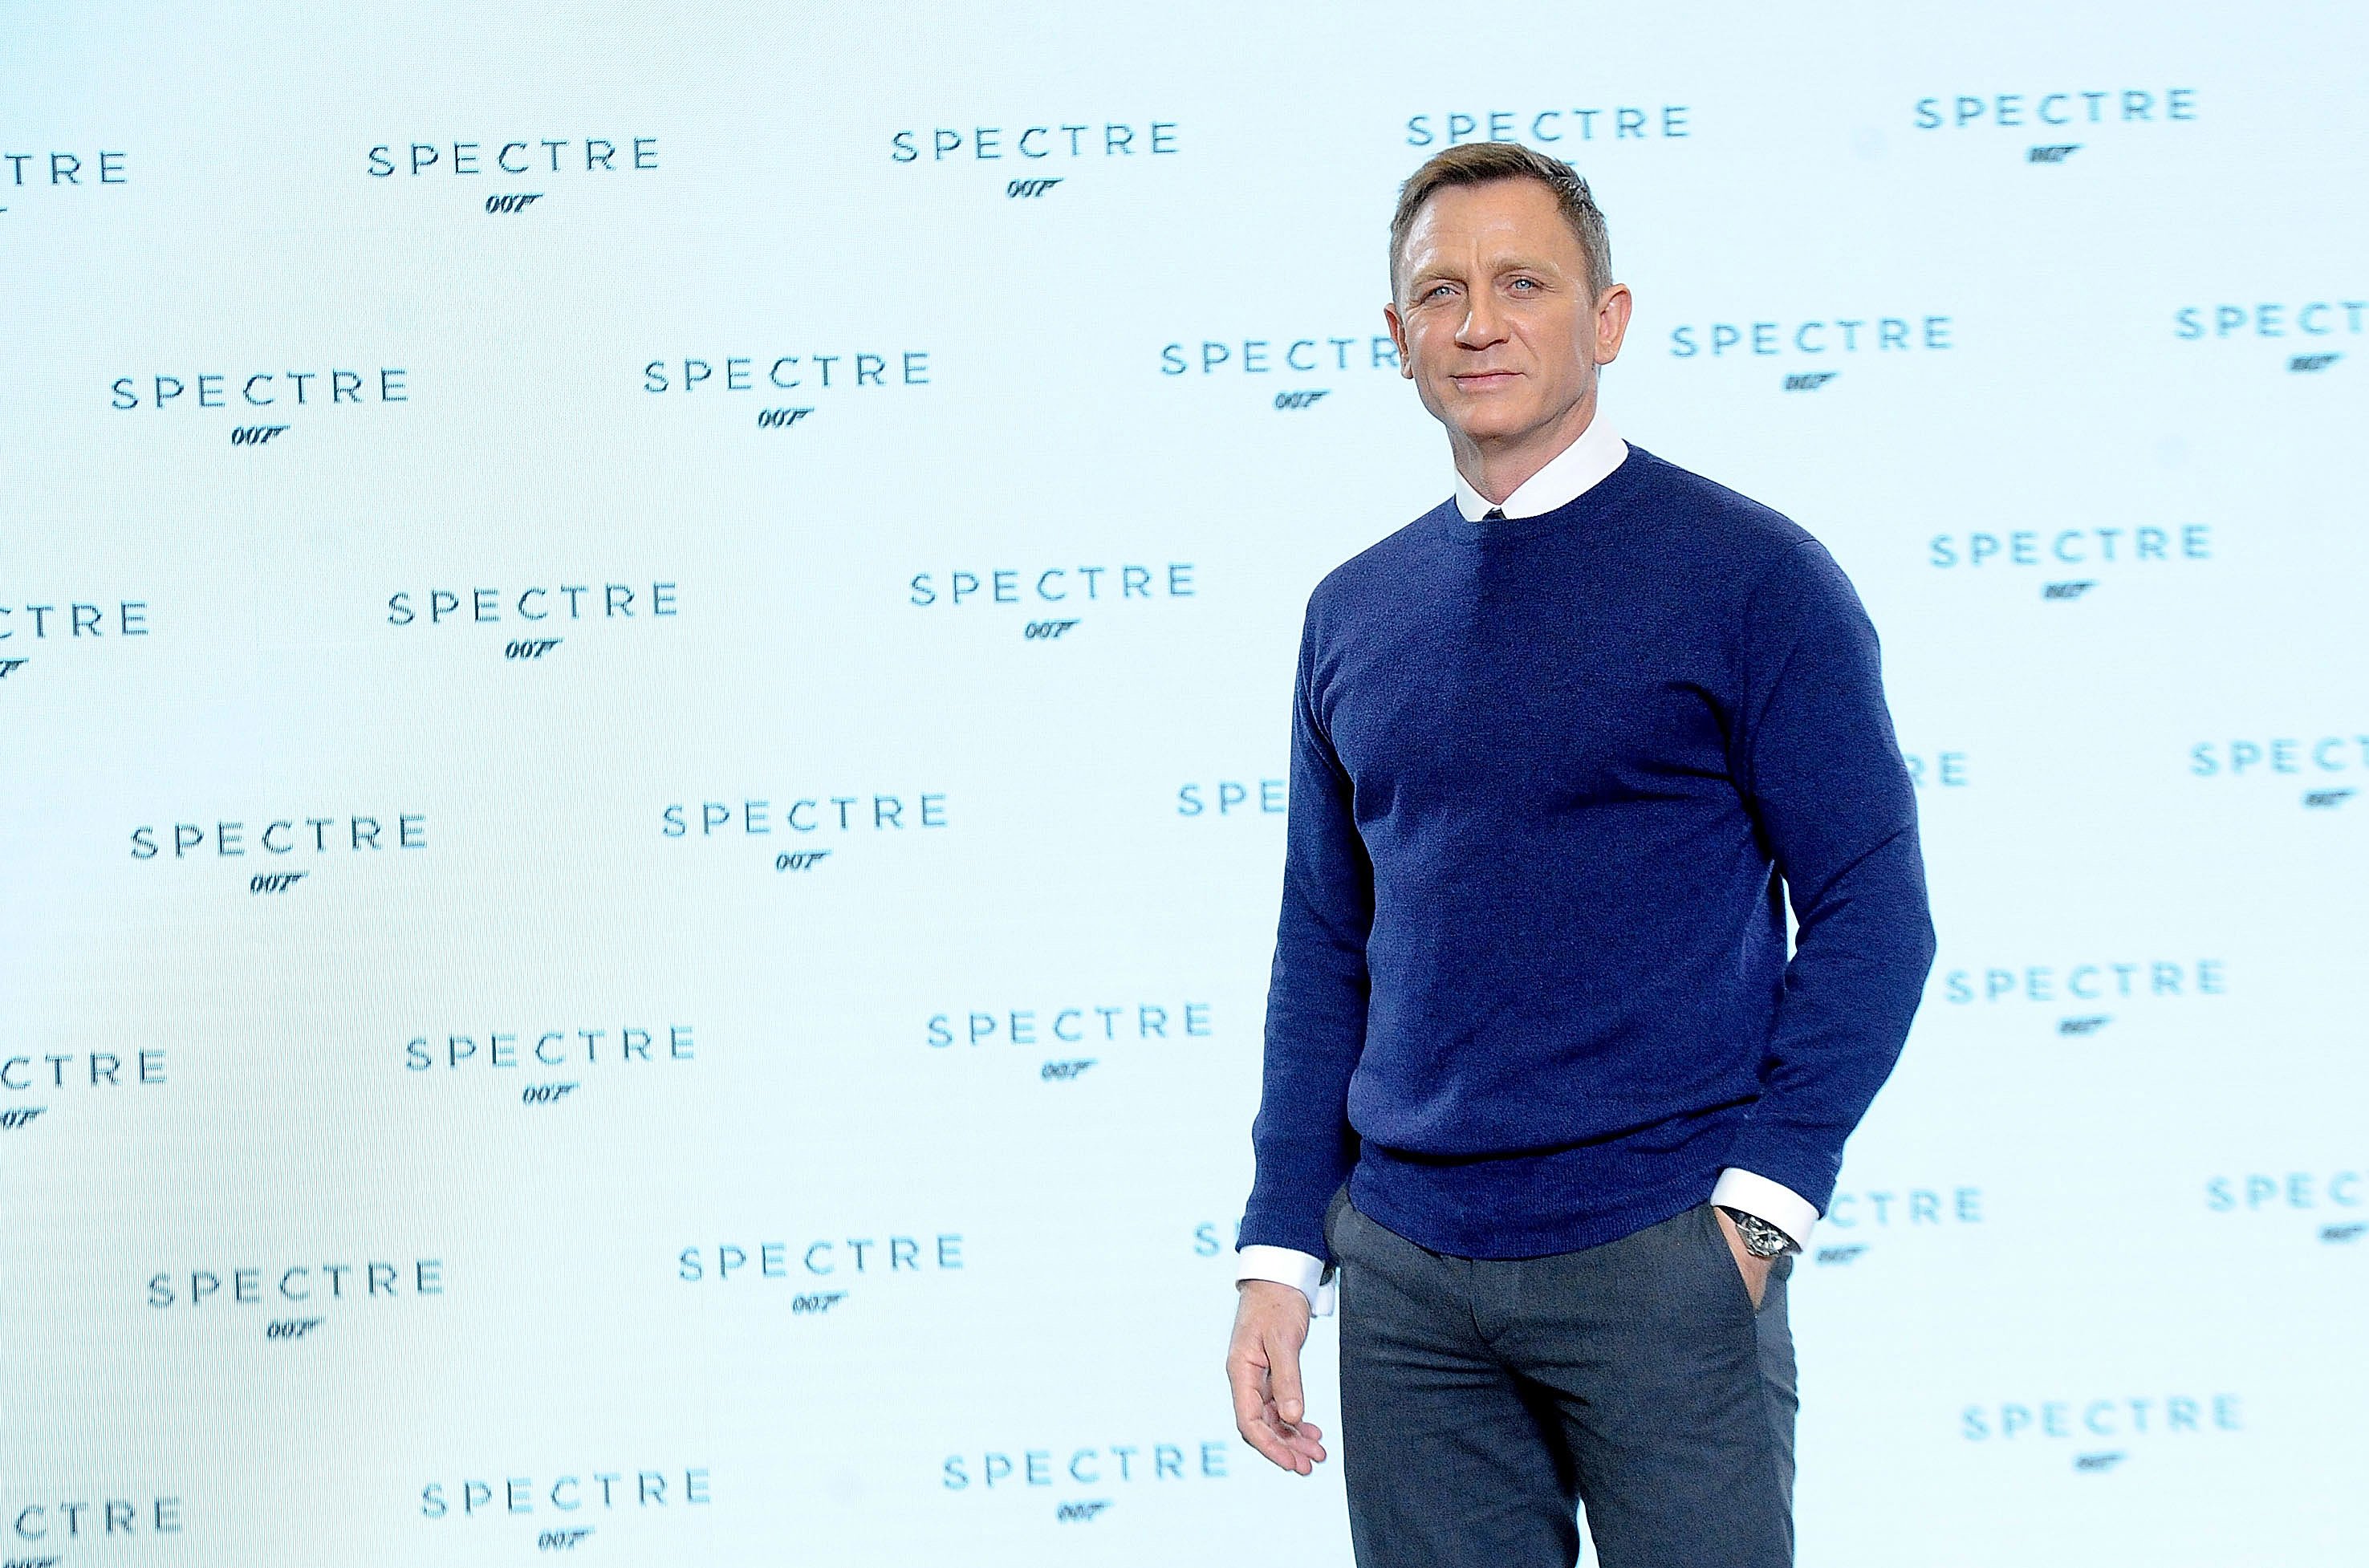 Daniel Craig attends a photocall for the start of filming "Spectre" in Iver Heath, England on December 4, 2014 | Photo: Getty Images